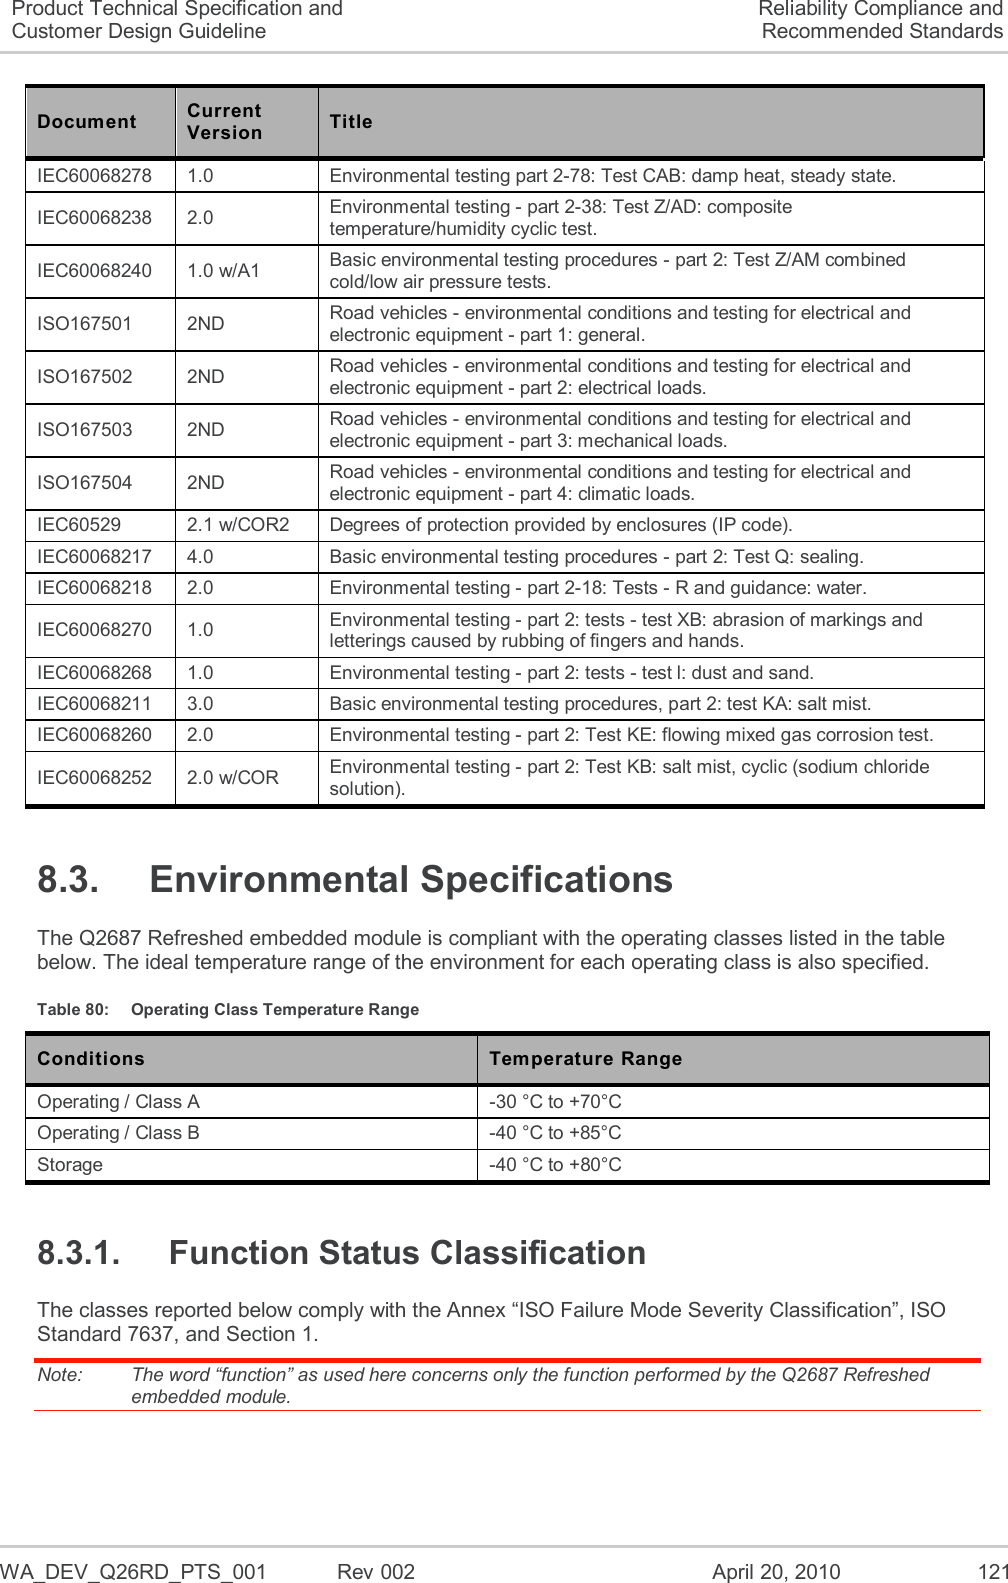   WA_DEV_Q26RD_PTS_001  Rev 002  April 20, 2010 121 Product Technical Specification and Customer Design Guideline Reliability Compliance and Recommended Standards Document Current Version Title IEC60068278 1.0 Environmental testing part 2-78: Test CAB: damp heat, steady state. IEC60068238 2.0 Environmental testing - part 2-38: Test Z/AD: composite temperature/humidity cyclic test. IEC60068240 1.0 w/A1 Basic environmental testing procedures - part 2: Test Z/AM combined cold/low air pressure tests. ISO167501 2ND Road vehicles - environmental conditions and testing for electrical and electronic equipment - part 1: general. ISO167502 2ND Road vehicles - environmental conditions and testing for electrical and electronic equipment - part 2: electrical loads. ISO167503 2ND Road vehicles - environmental conditions and testing for electrical and electronic equipment - part 3: mechanical loads. ISO167504 2ND Road vehicles - environmental conditions and testing for electrical and electronic equipment - part 4: climatic loads. IEC60529 2.1 w/COR2 Degrees of protection provided by enclosures (IP code). IEC60068217 4.0 Basic environmental testing procedures - part 2: Test Q: sealing. IEC60068218 2.0 Environmental testing - part 2-18: Tests - R and guidance: water. IEC60068270 1.0 Environmental testing - part 2: tests - test XB: abrasion of markings and letterings caused by rubbing of fingers and hands. IEC60068268 1.0 Environmental testing - part 2: tests - test l: dust and sand. IEC60068211 3.0 Basic environmental testing procedures, part 2: test KA: salt mist. IEC60068260 2.0 Environmental testing - part 2: Test KE: flowing mixed gas corrosion test. IEC60068252 2.0 w/COR Environmental testing - part 2: Test KB: salt mist, cyclic (sodium chloride solution). 8.3.  Environmental Specifications The Q2687 Refreshed embedded module is compliant with the operating classes listed in the table below. The ideal temperature range of the environment for each operating class is also specified. Table 80:  Operating Class Temperature Range Conditions Temperature Range Operating / Class A -30 °C to +70°C Operating / Class B  -40 °C to +85°C Storage  -40 °C to +80°C 8.3.1.  Function Status Classification The classes reported below comply with the Annex “ISO Failure Mode Severity Classification”, ISO Standard 7637, and Section 1. Note:   The word “function” as used here concerns only the function performed by the Q2687 Refreshed embedded module. 